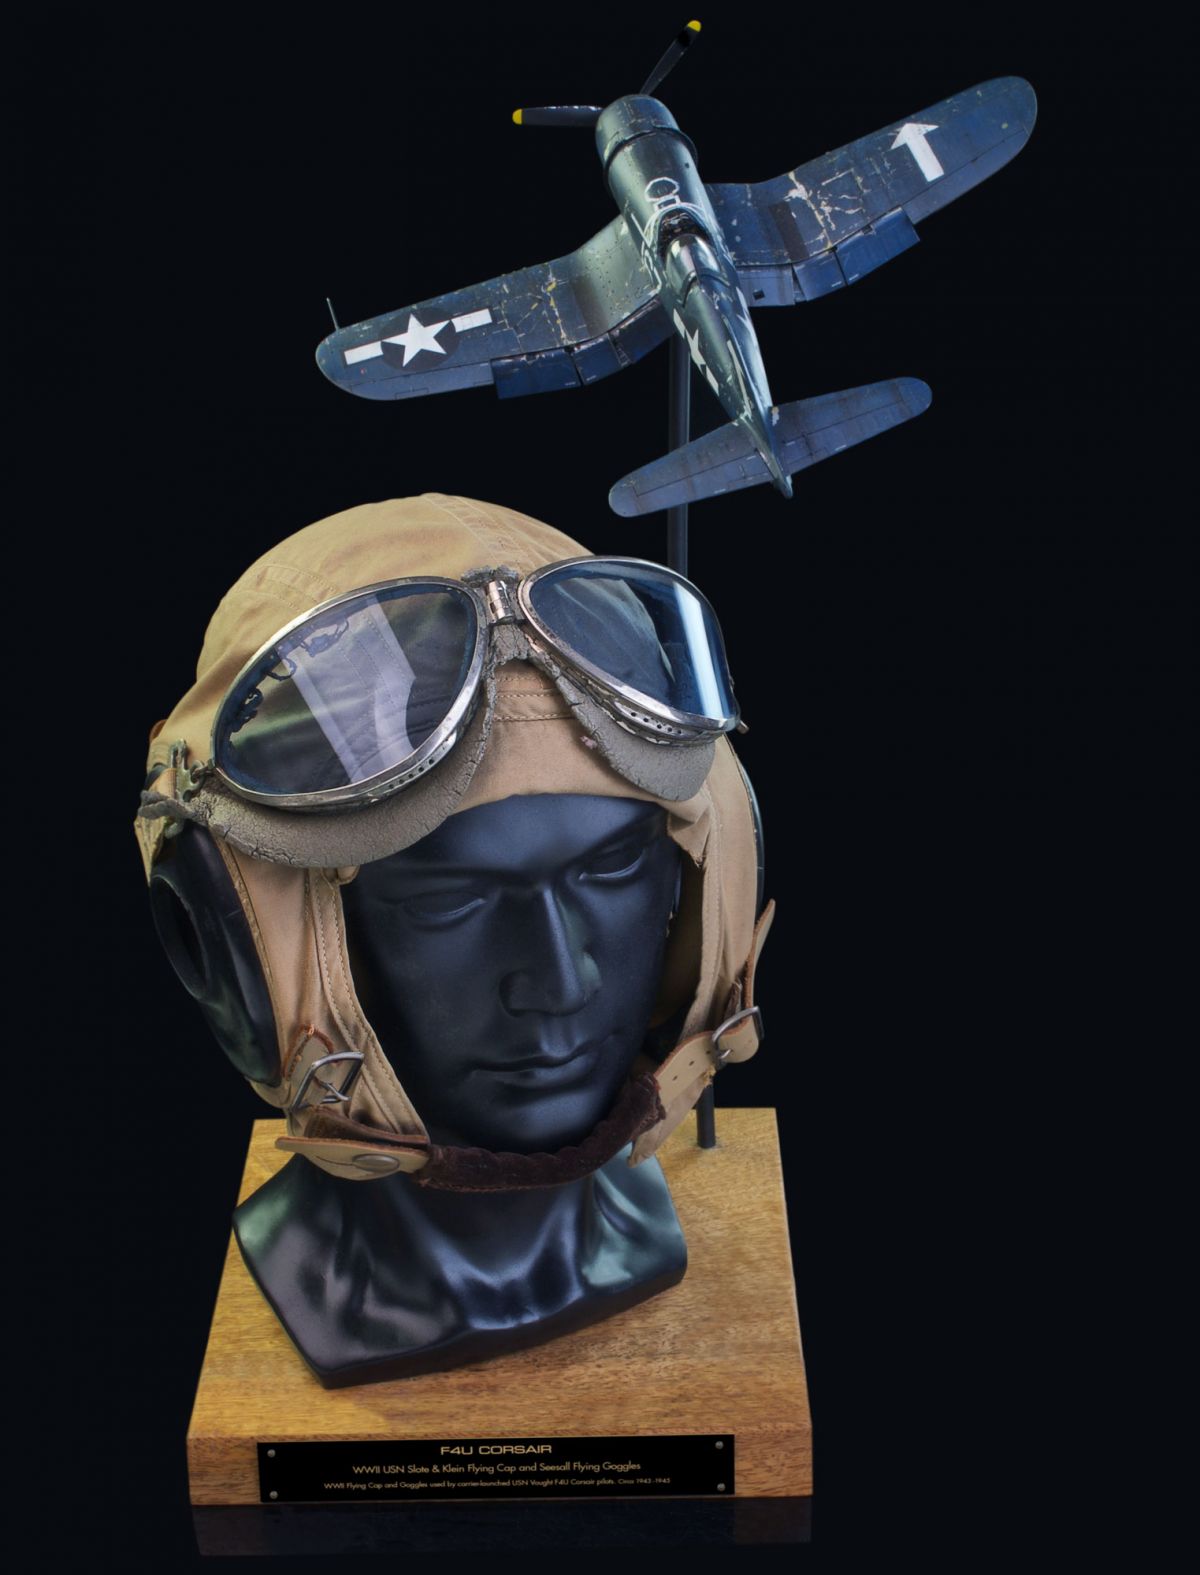 VOUGHT F4U CORSAIR WWII USN SLOTE & KLEIN AN-48440-1 FLYING HELMET WITH 'BLUE GLASS LENS' SEESALL FLYING GOGGLES 